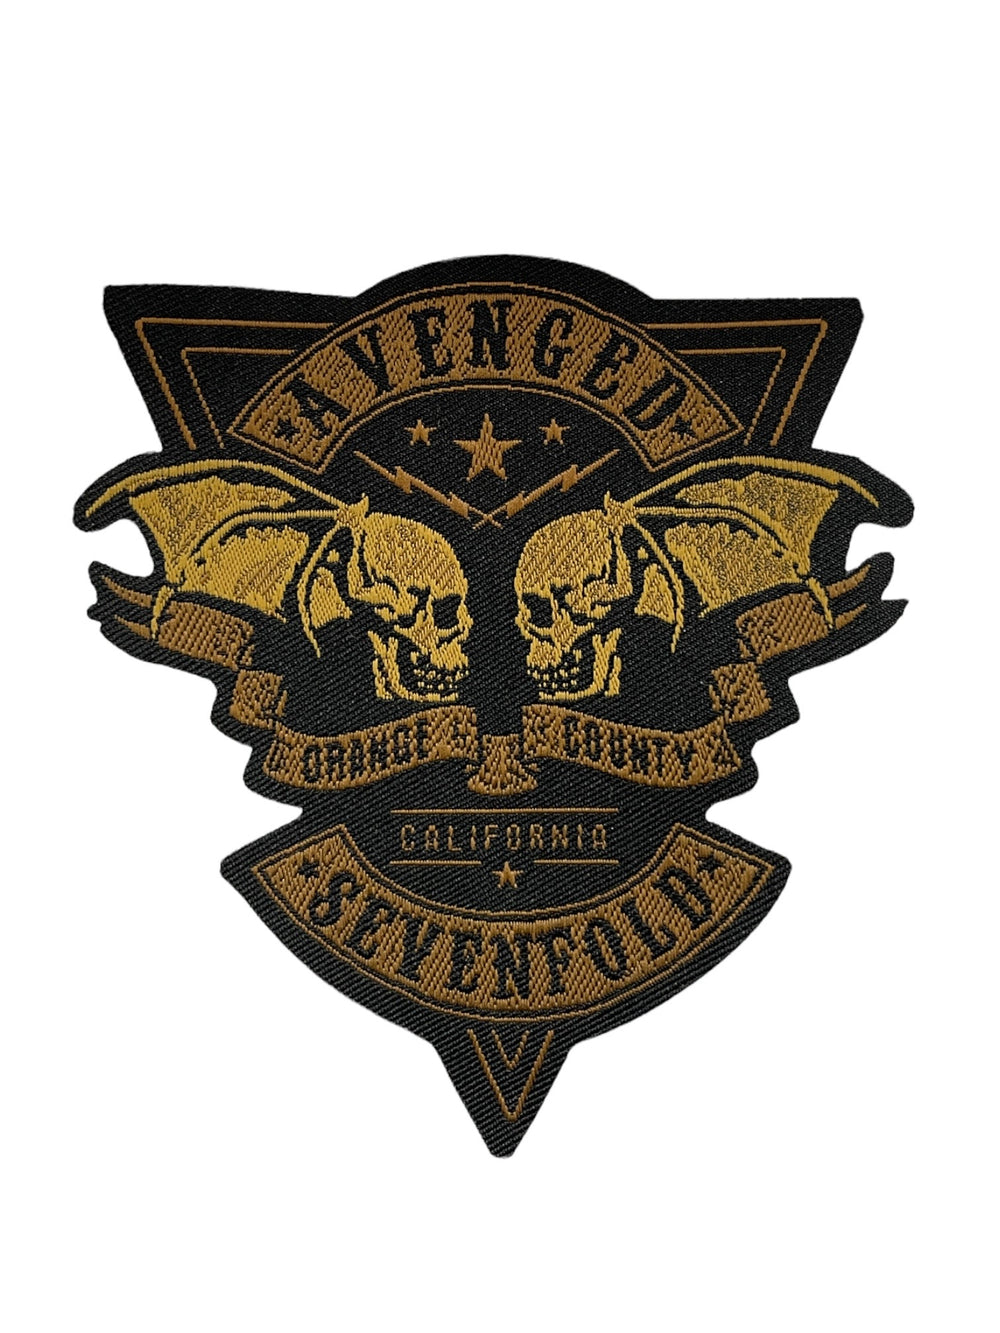 Avenged Sevenfold Orange County Official Woven Patch Brand New